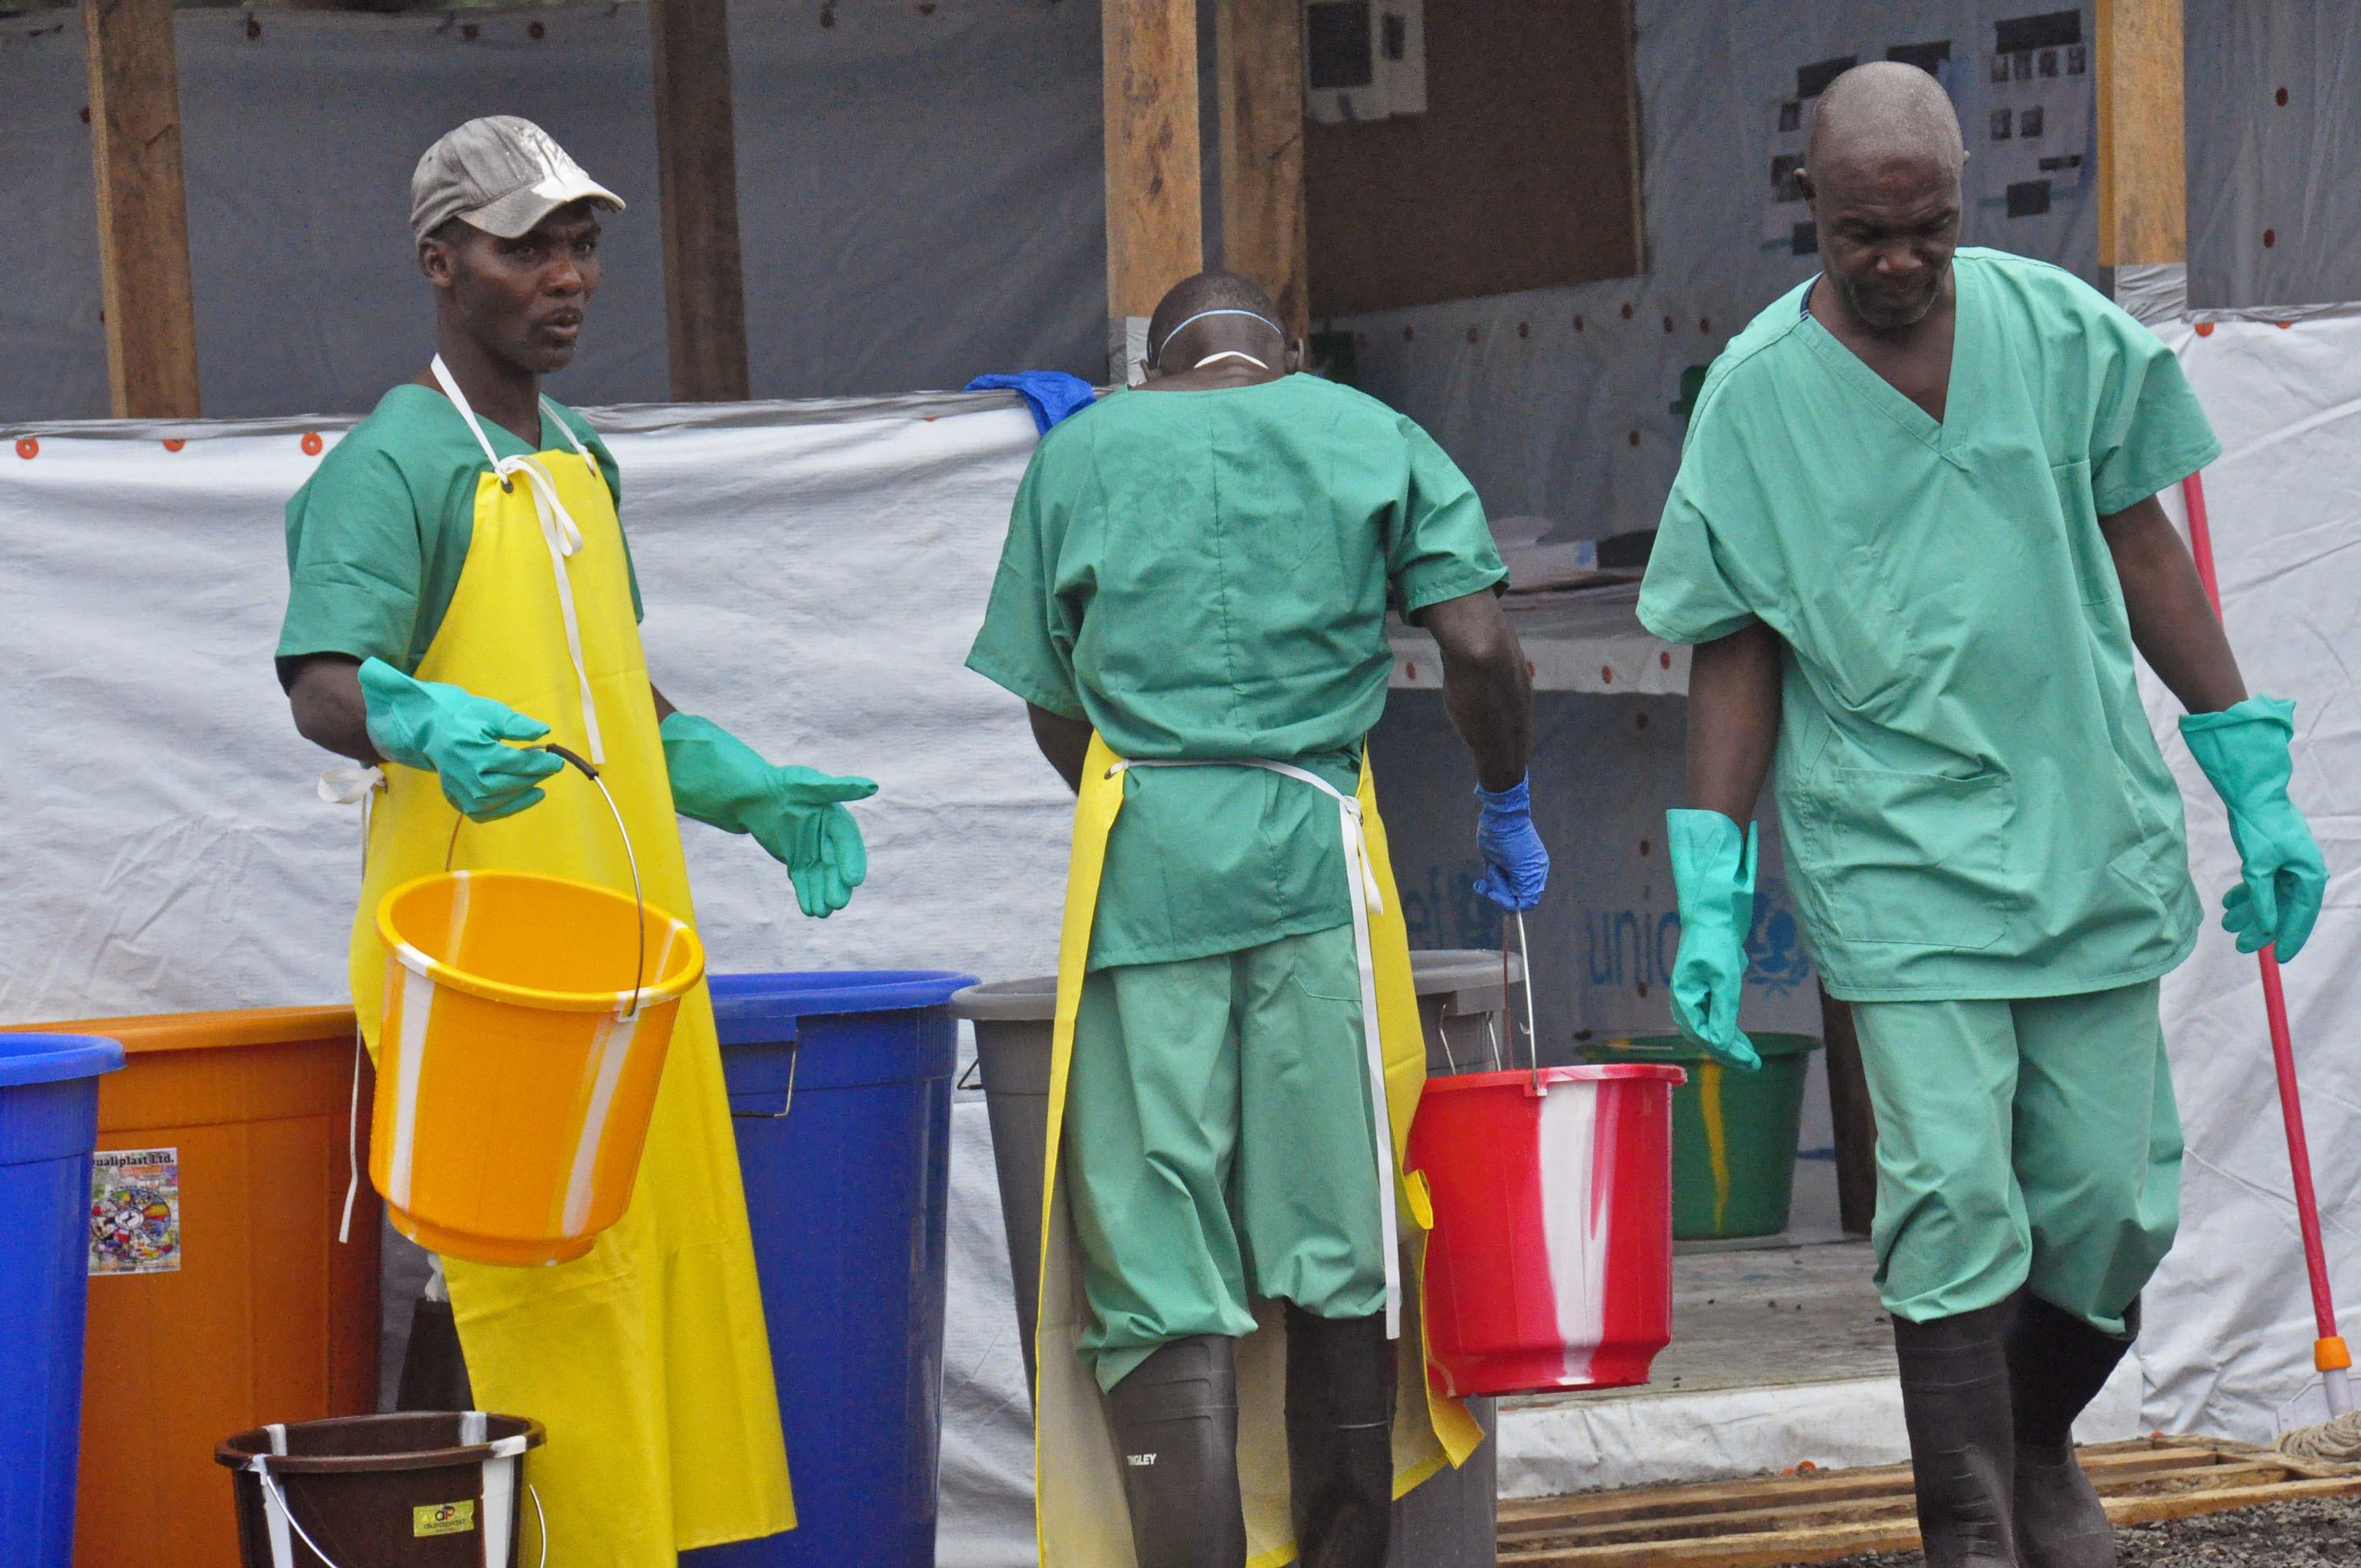 Defeat of Ebola means temporary legal status for thousands of West Africans will expire - Washington Times